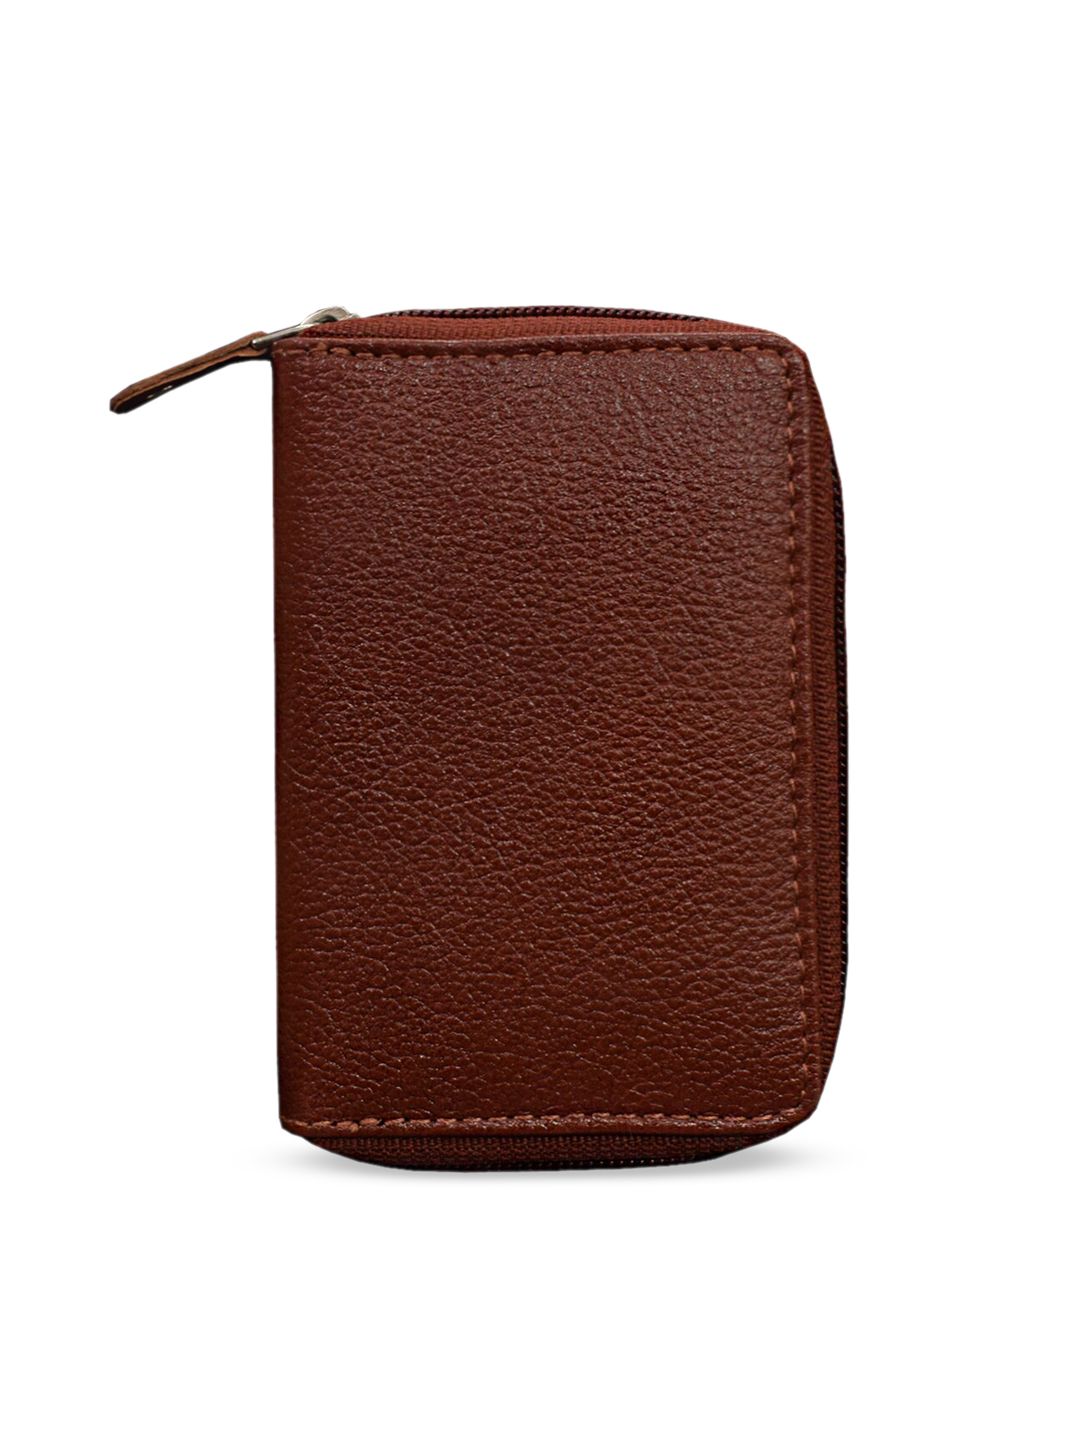 ABYS Unisex Brown Textured Card Holder Price in India